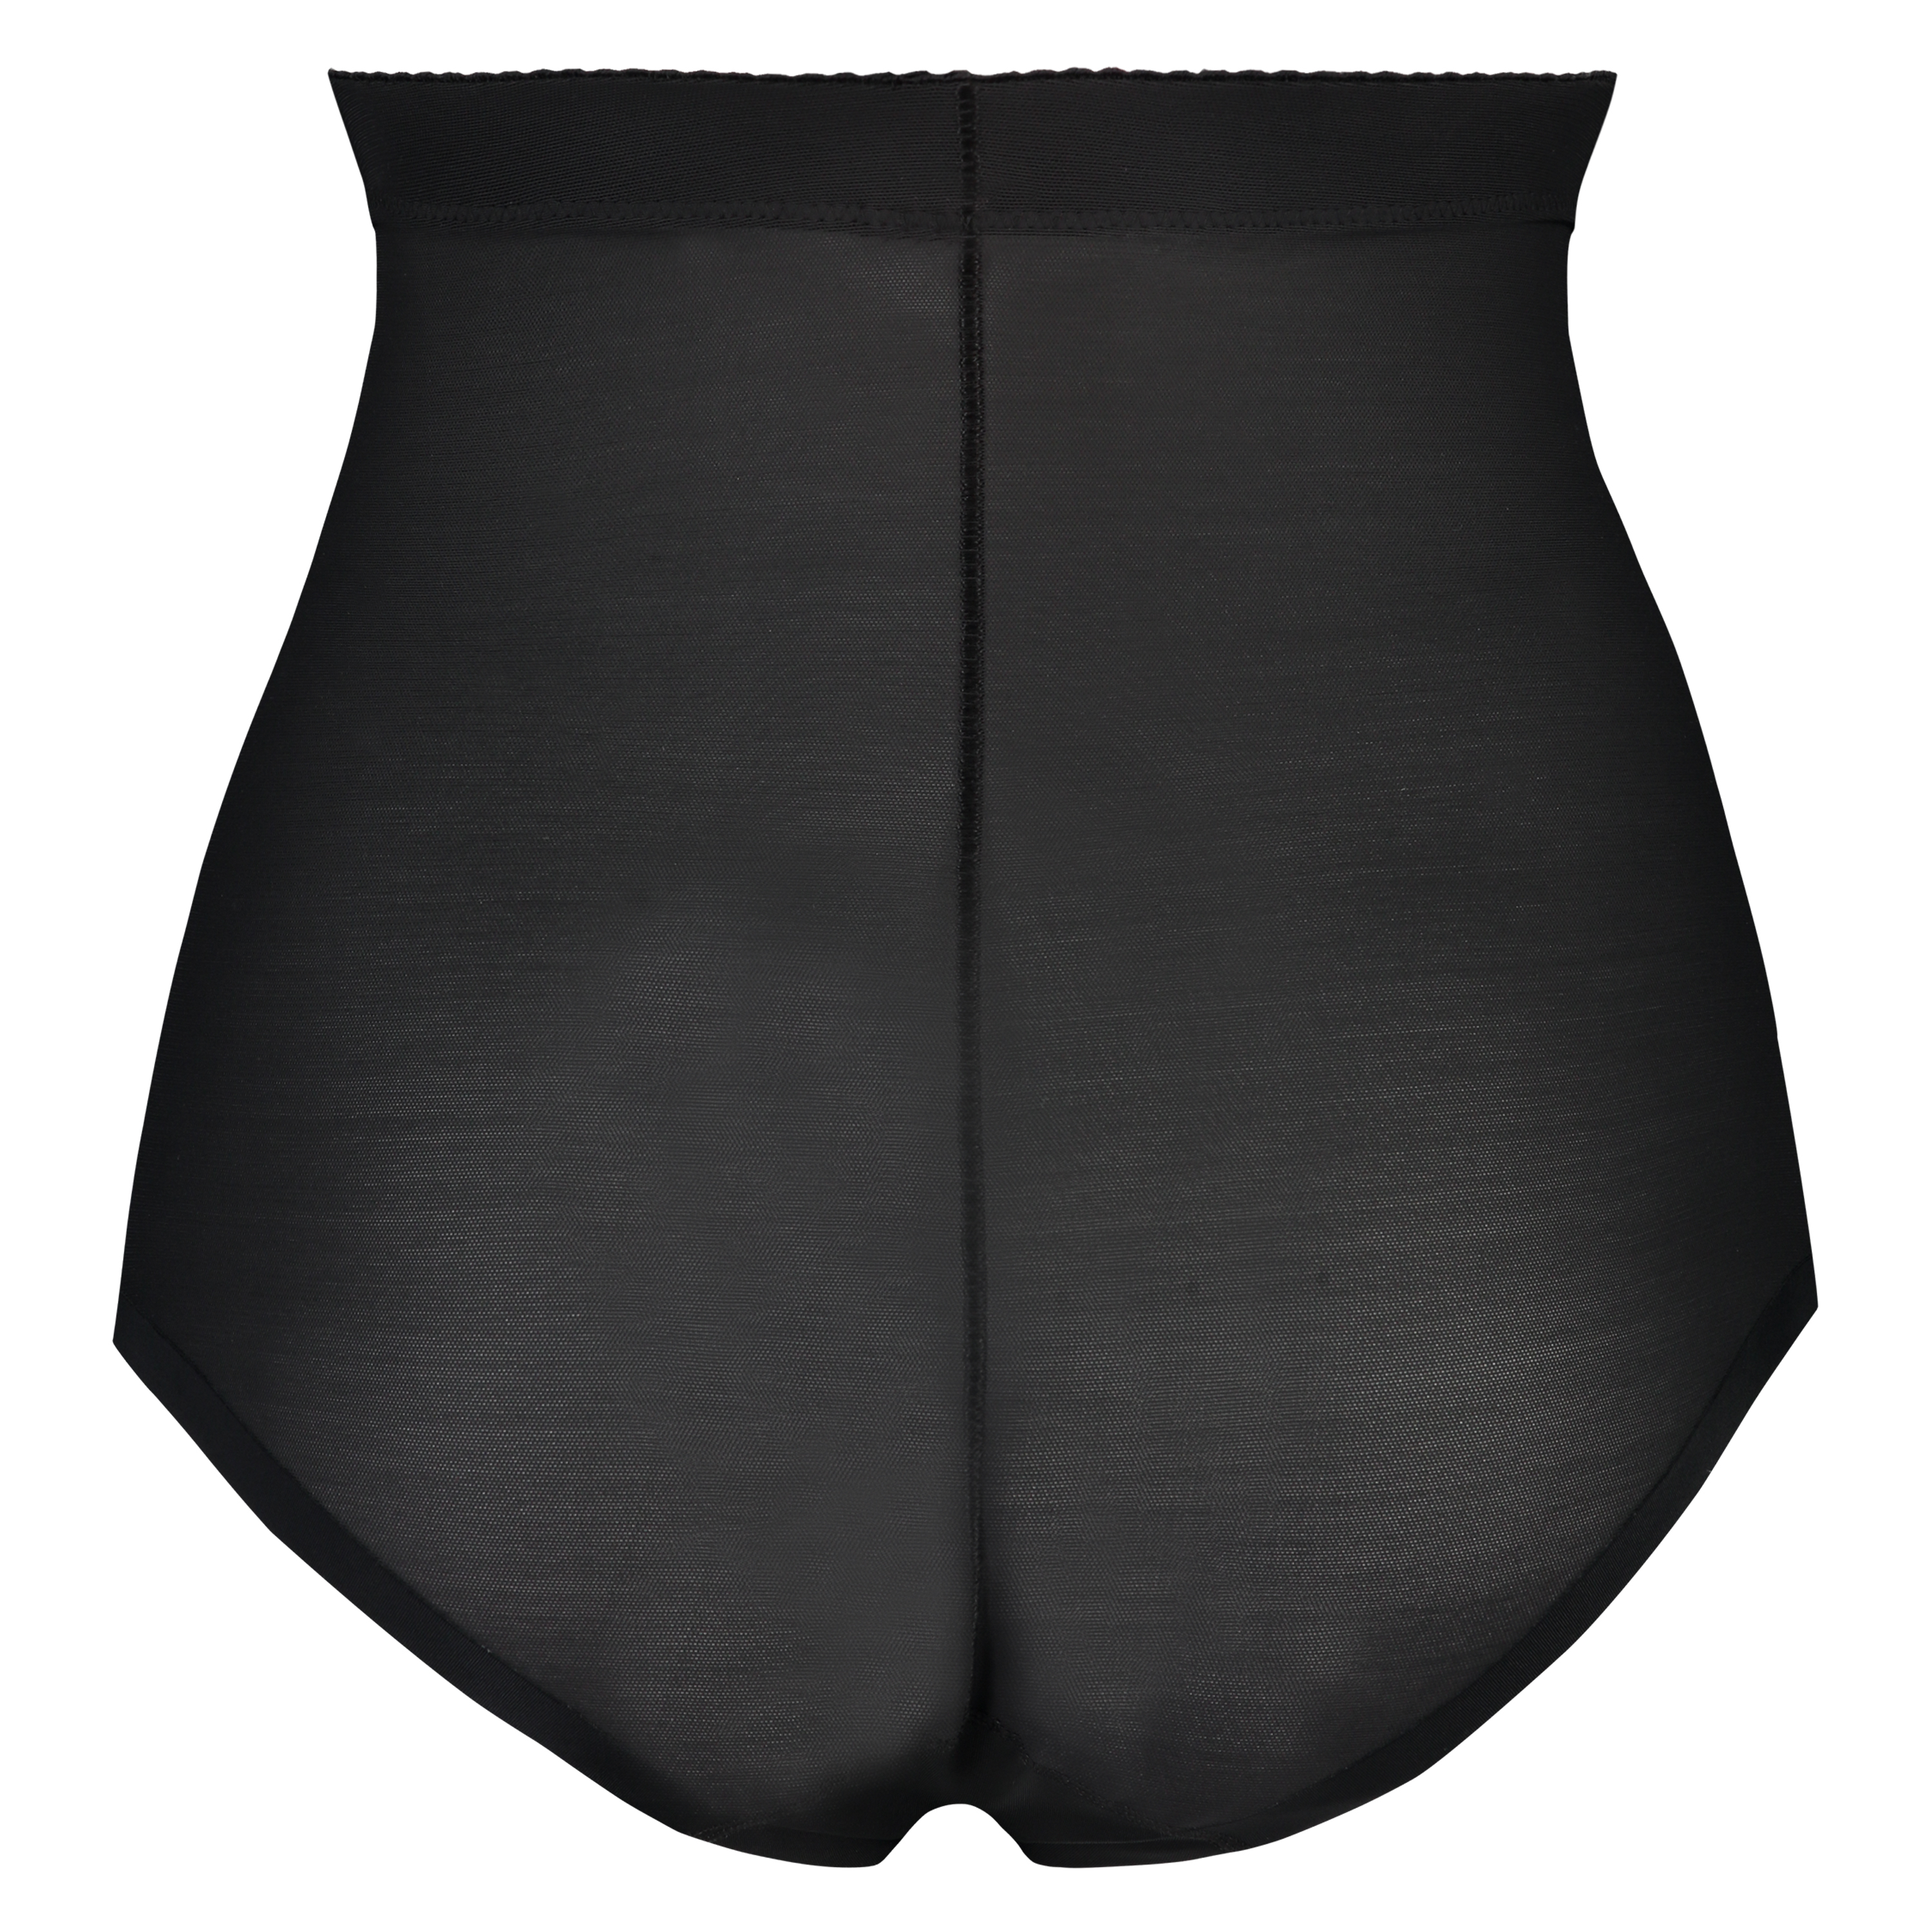 Sculpting scallop high waisted brief - Level 3, Black, main